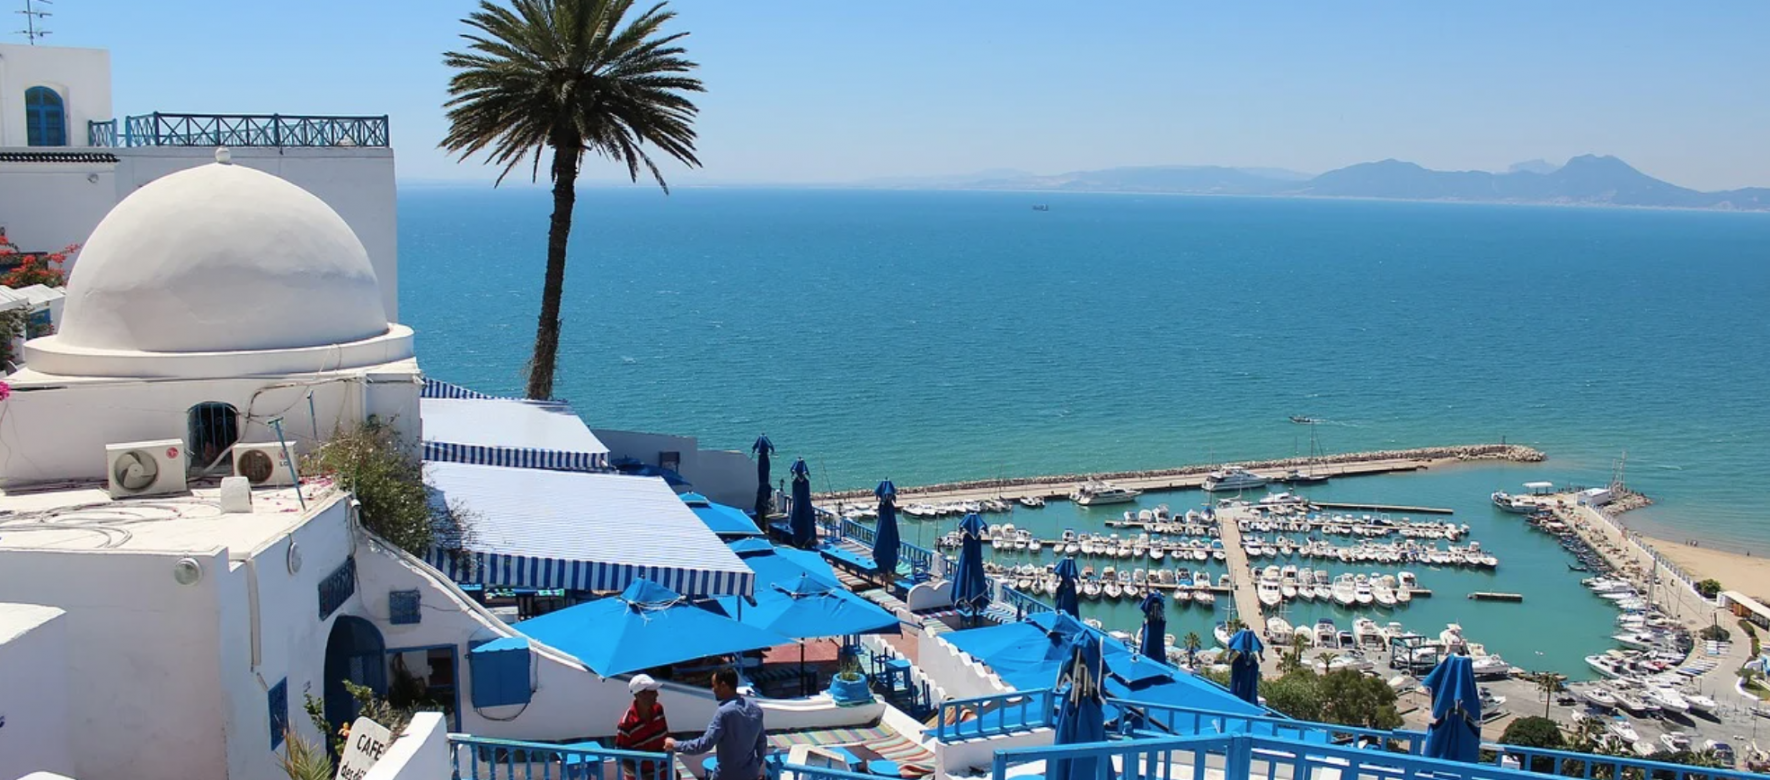 Tunisia : What is the economic situation, tourist income and food coverage in the country?